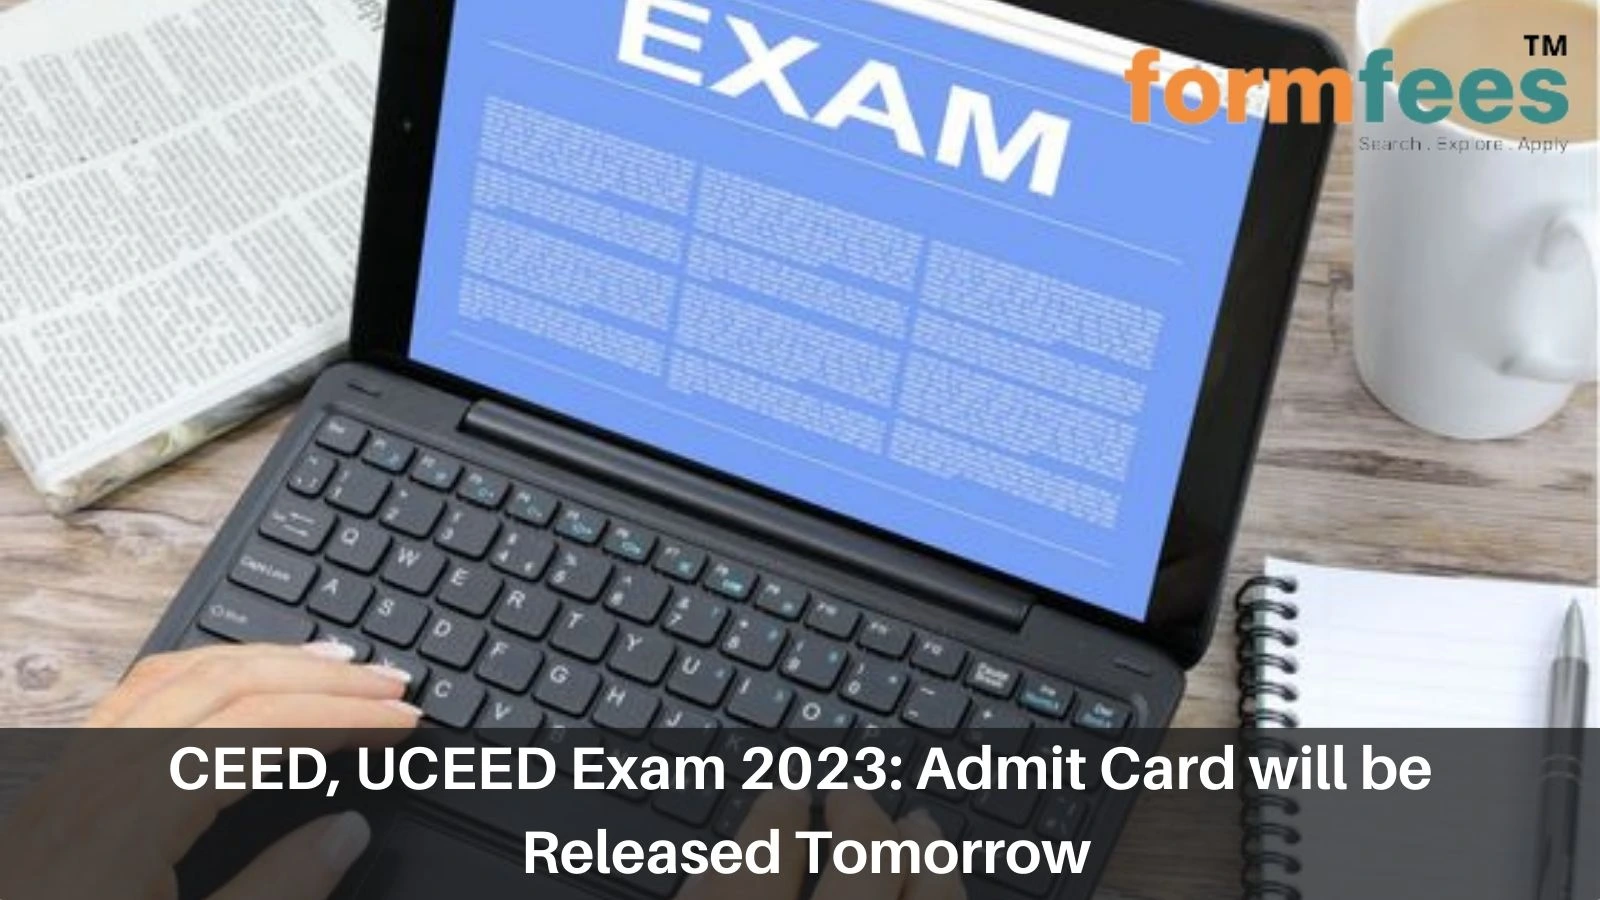 CEED, UCEED Exam 2023: Admit Card will be Released Tomorrow